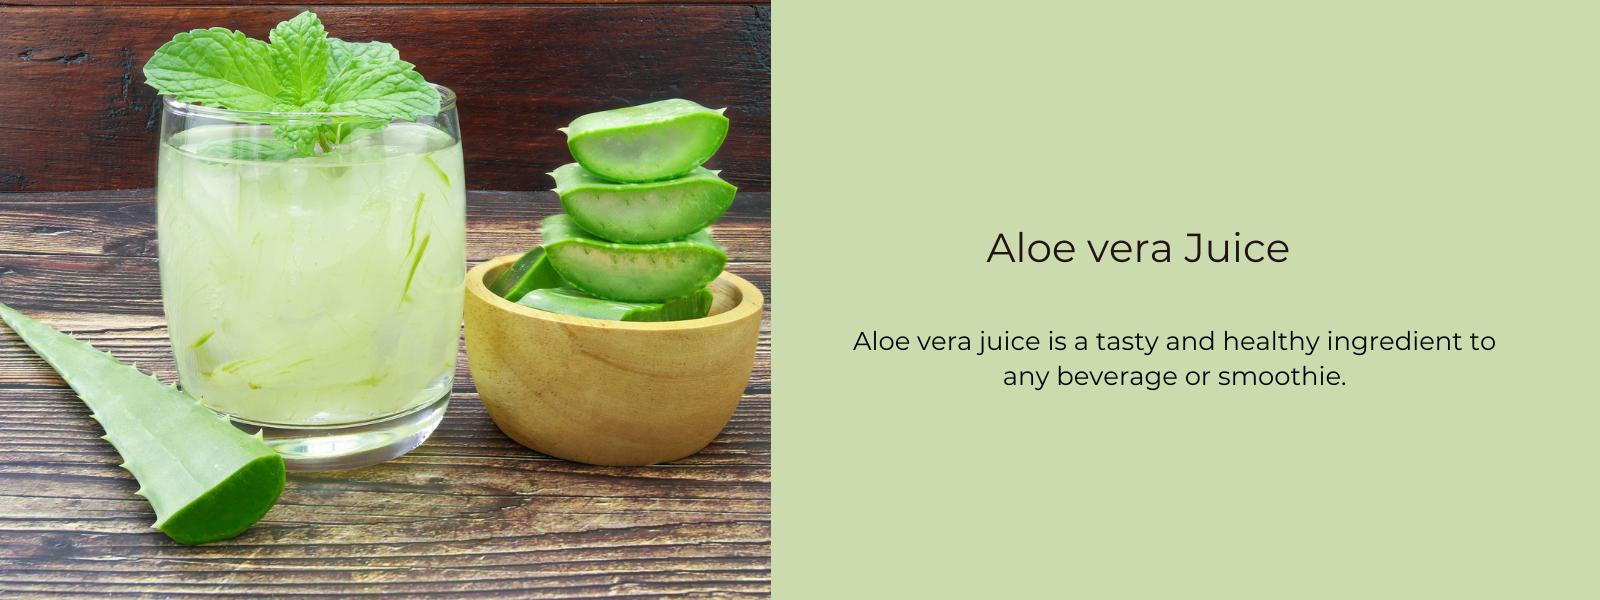 Aloe vera Juice – Health Benefits, Uses and Important Facts